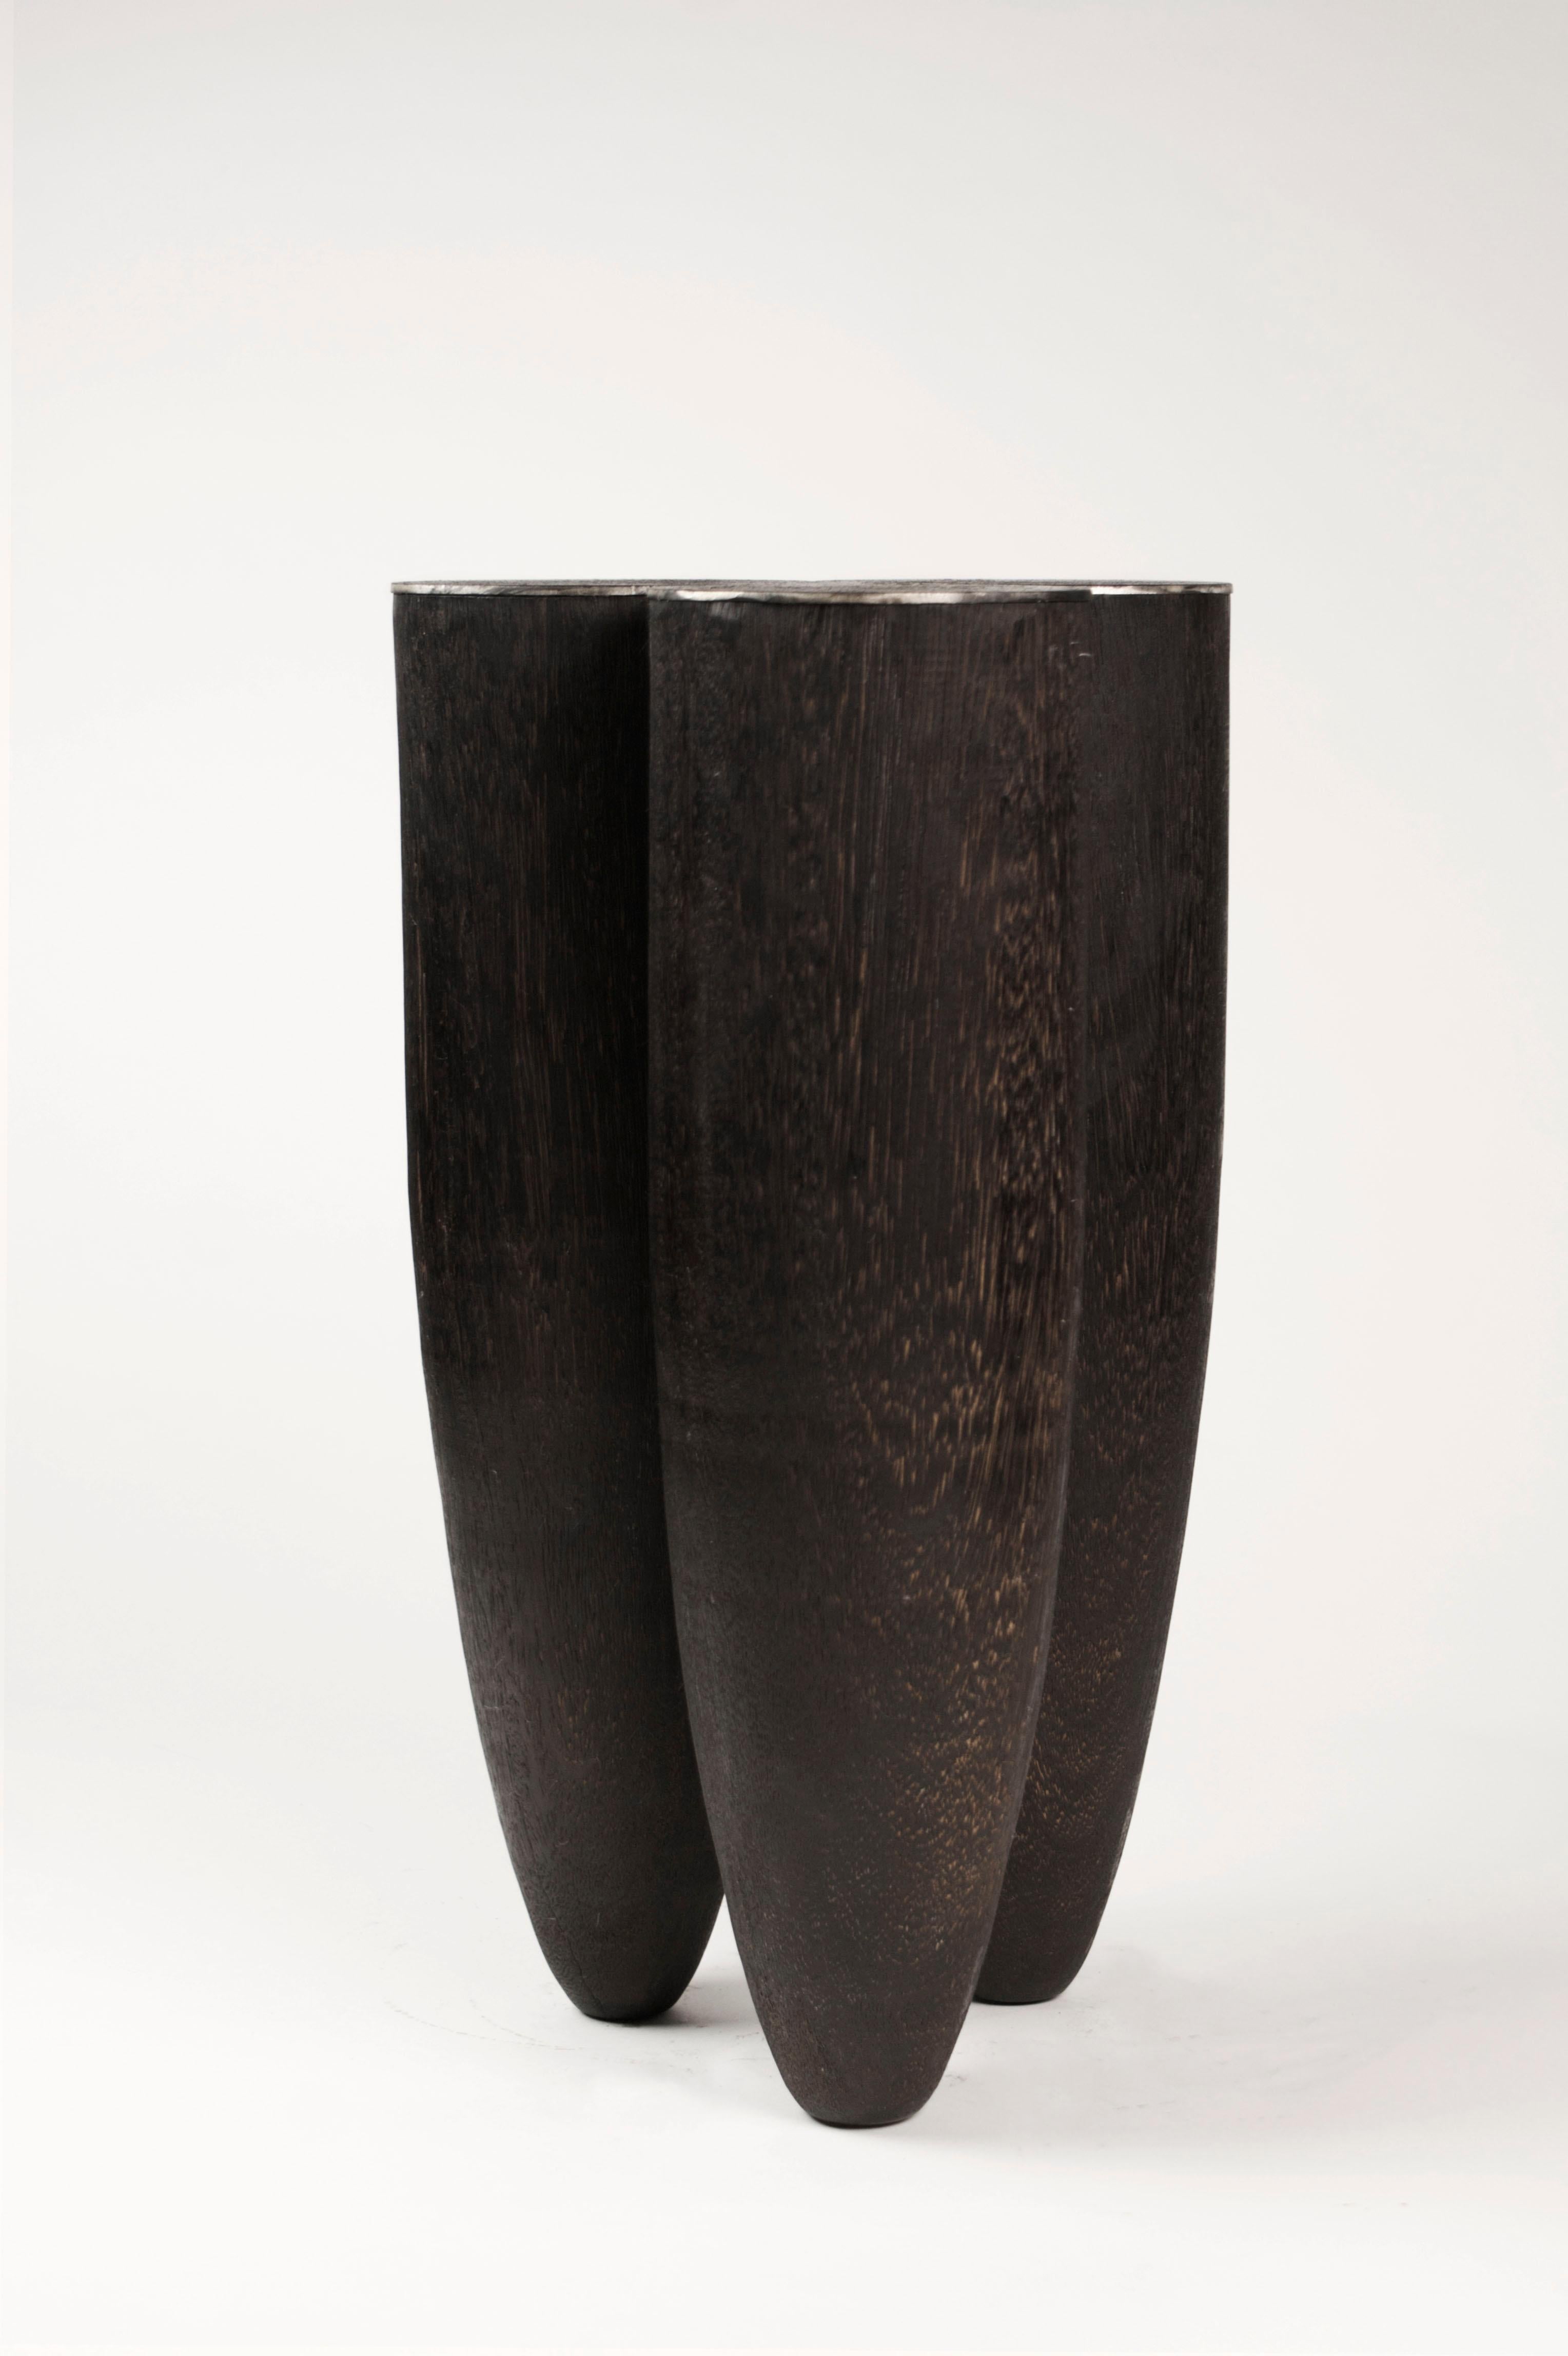 Senufo stool
Stool or side table
Measures: 50 cm H x 30 cm W, 17.9” H x 11.8” W.
Iroko wood and burned steel
Signed by Arno Declercq.

Arno Declercq
Belgian designer and art dealer who makes bespoke objects with passion for design,